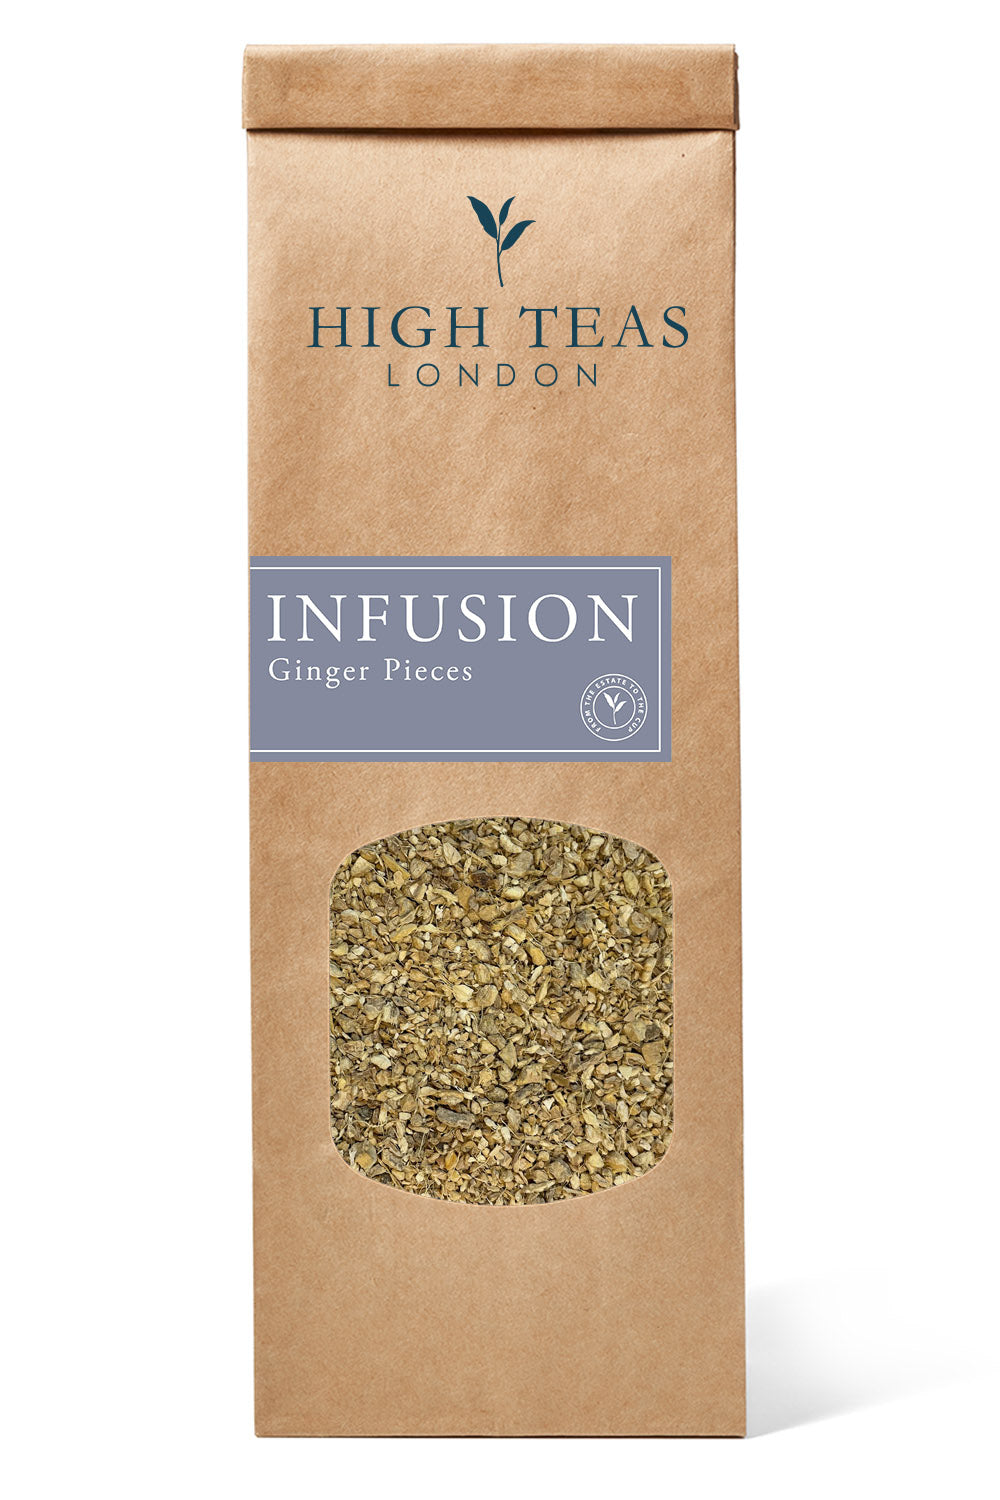 Ginger Pieces Infusion-50g-Loose Leaf Tea-High Teas